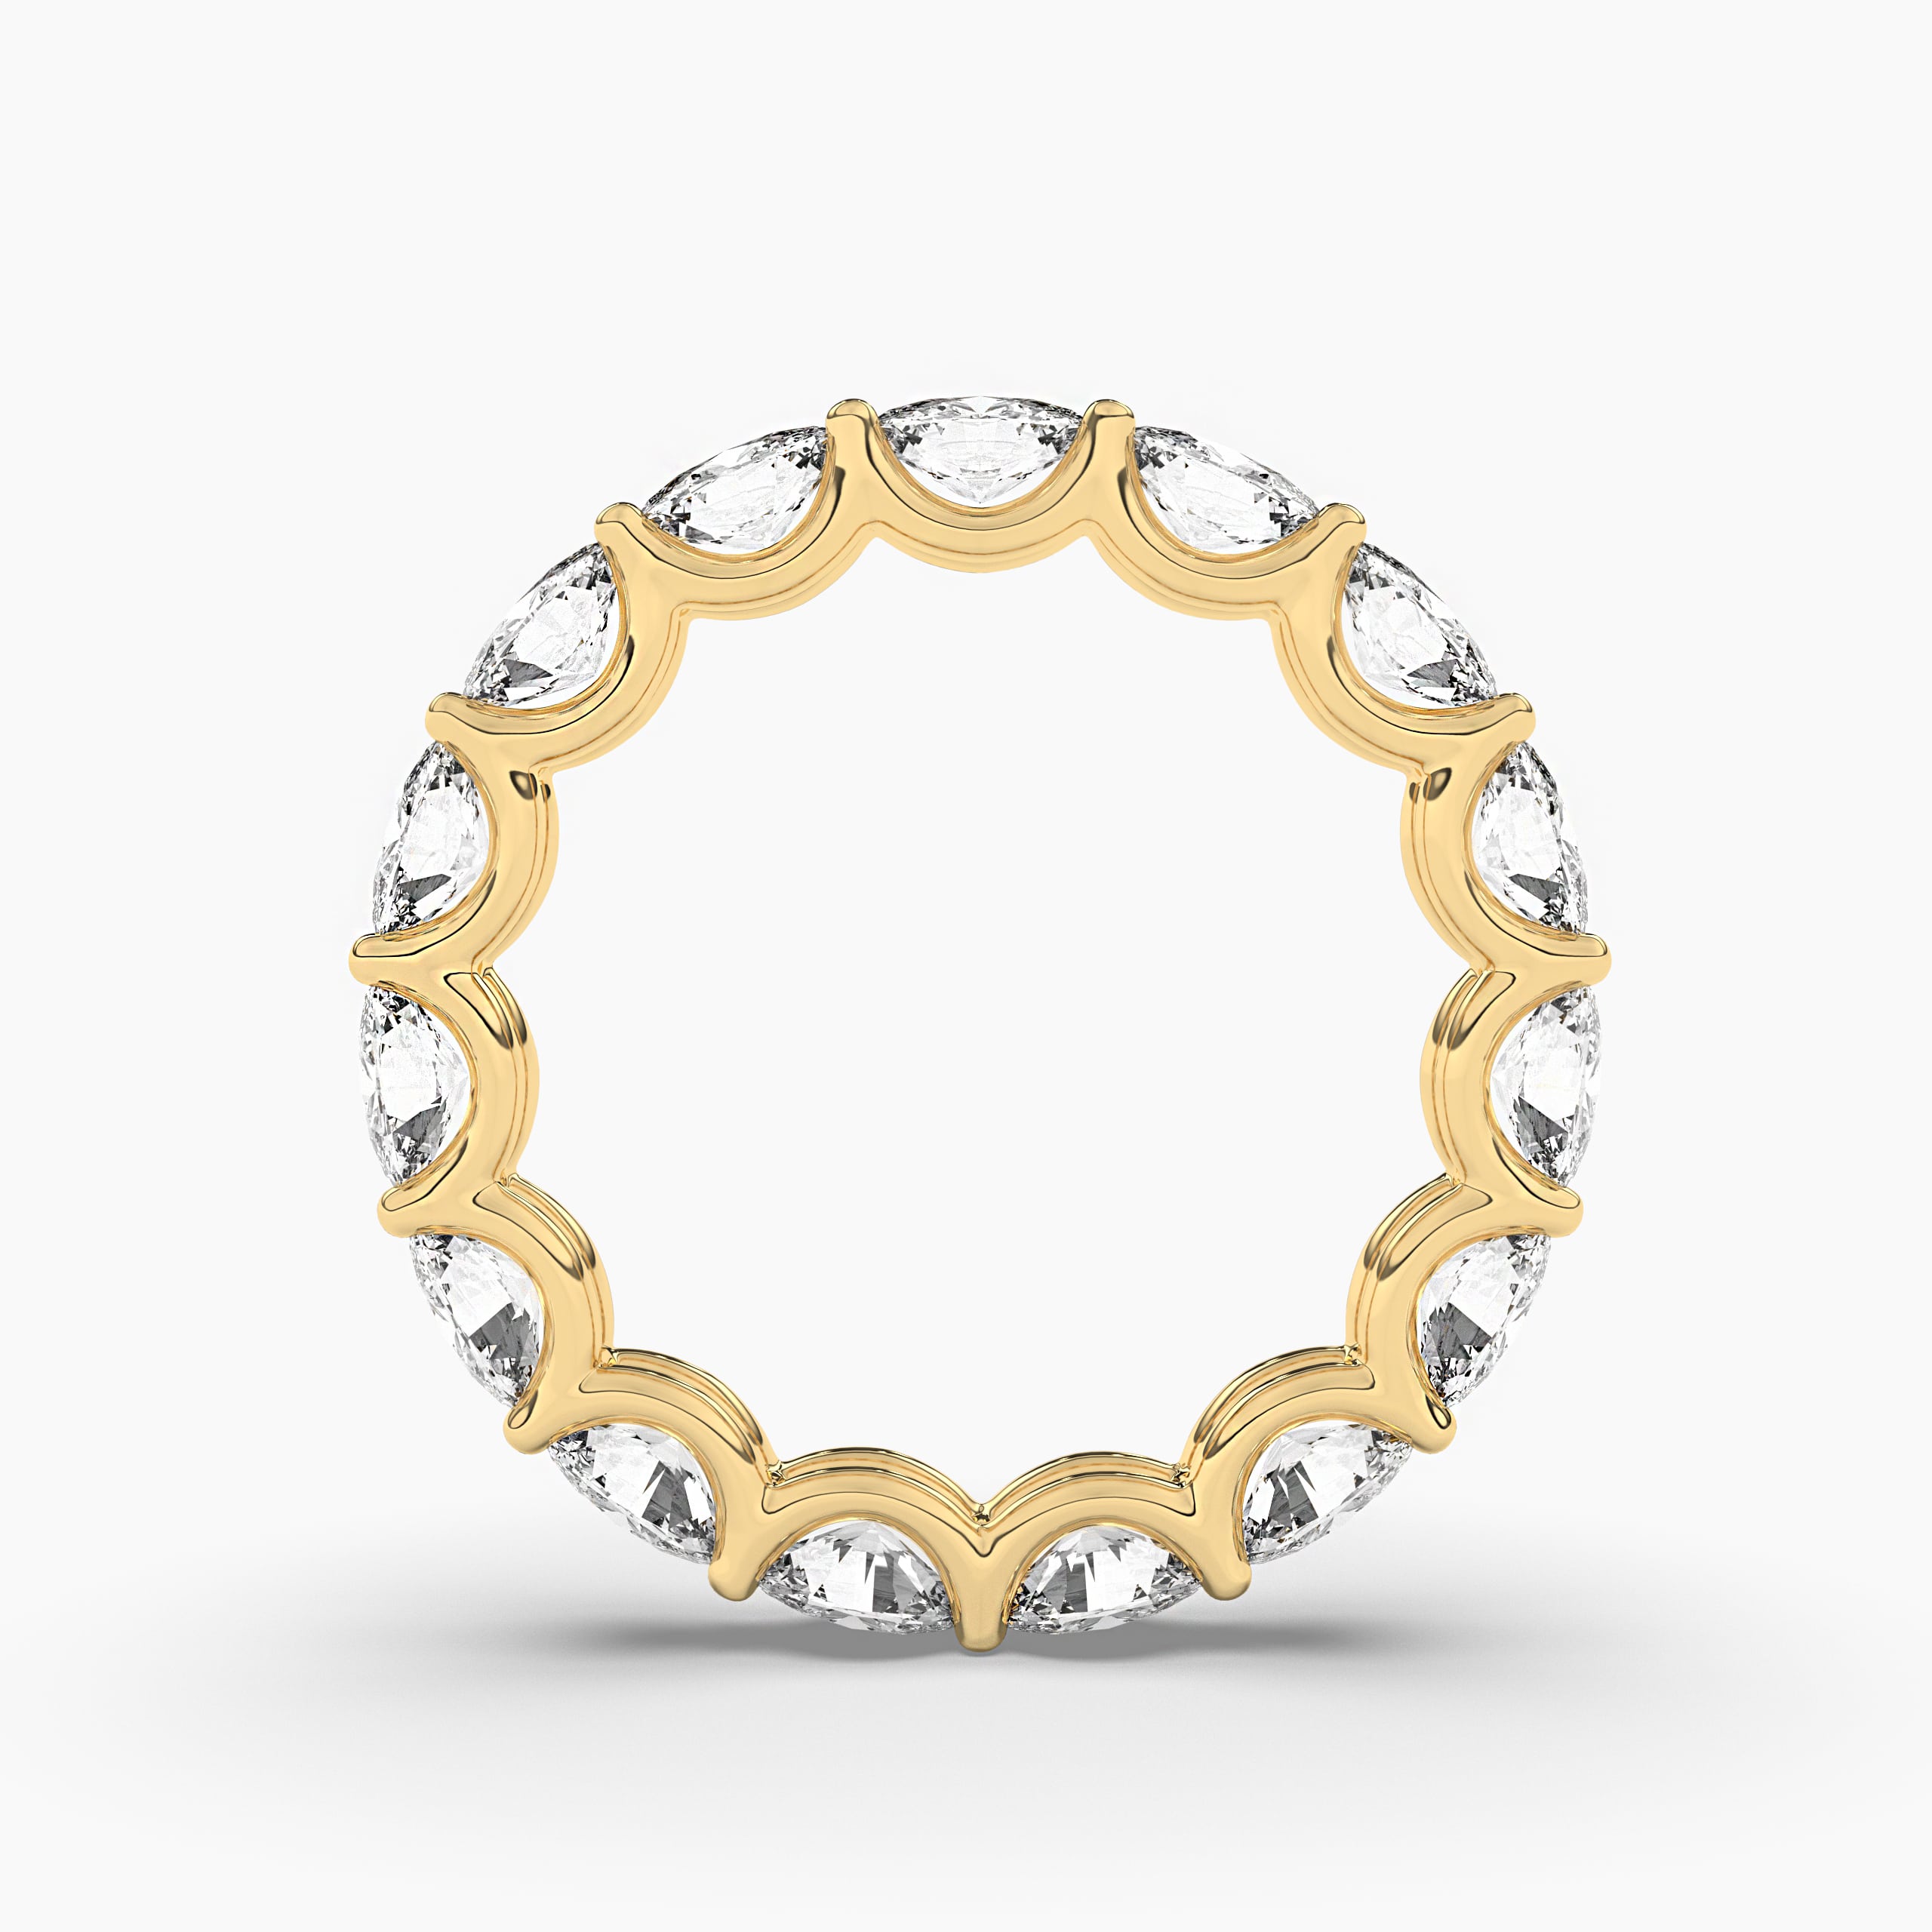 ROUND SHAPE  MOISSANITE ETERNITY BAND IN YELLOW GOLD